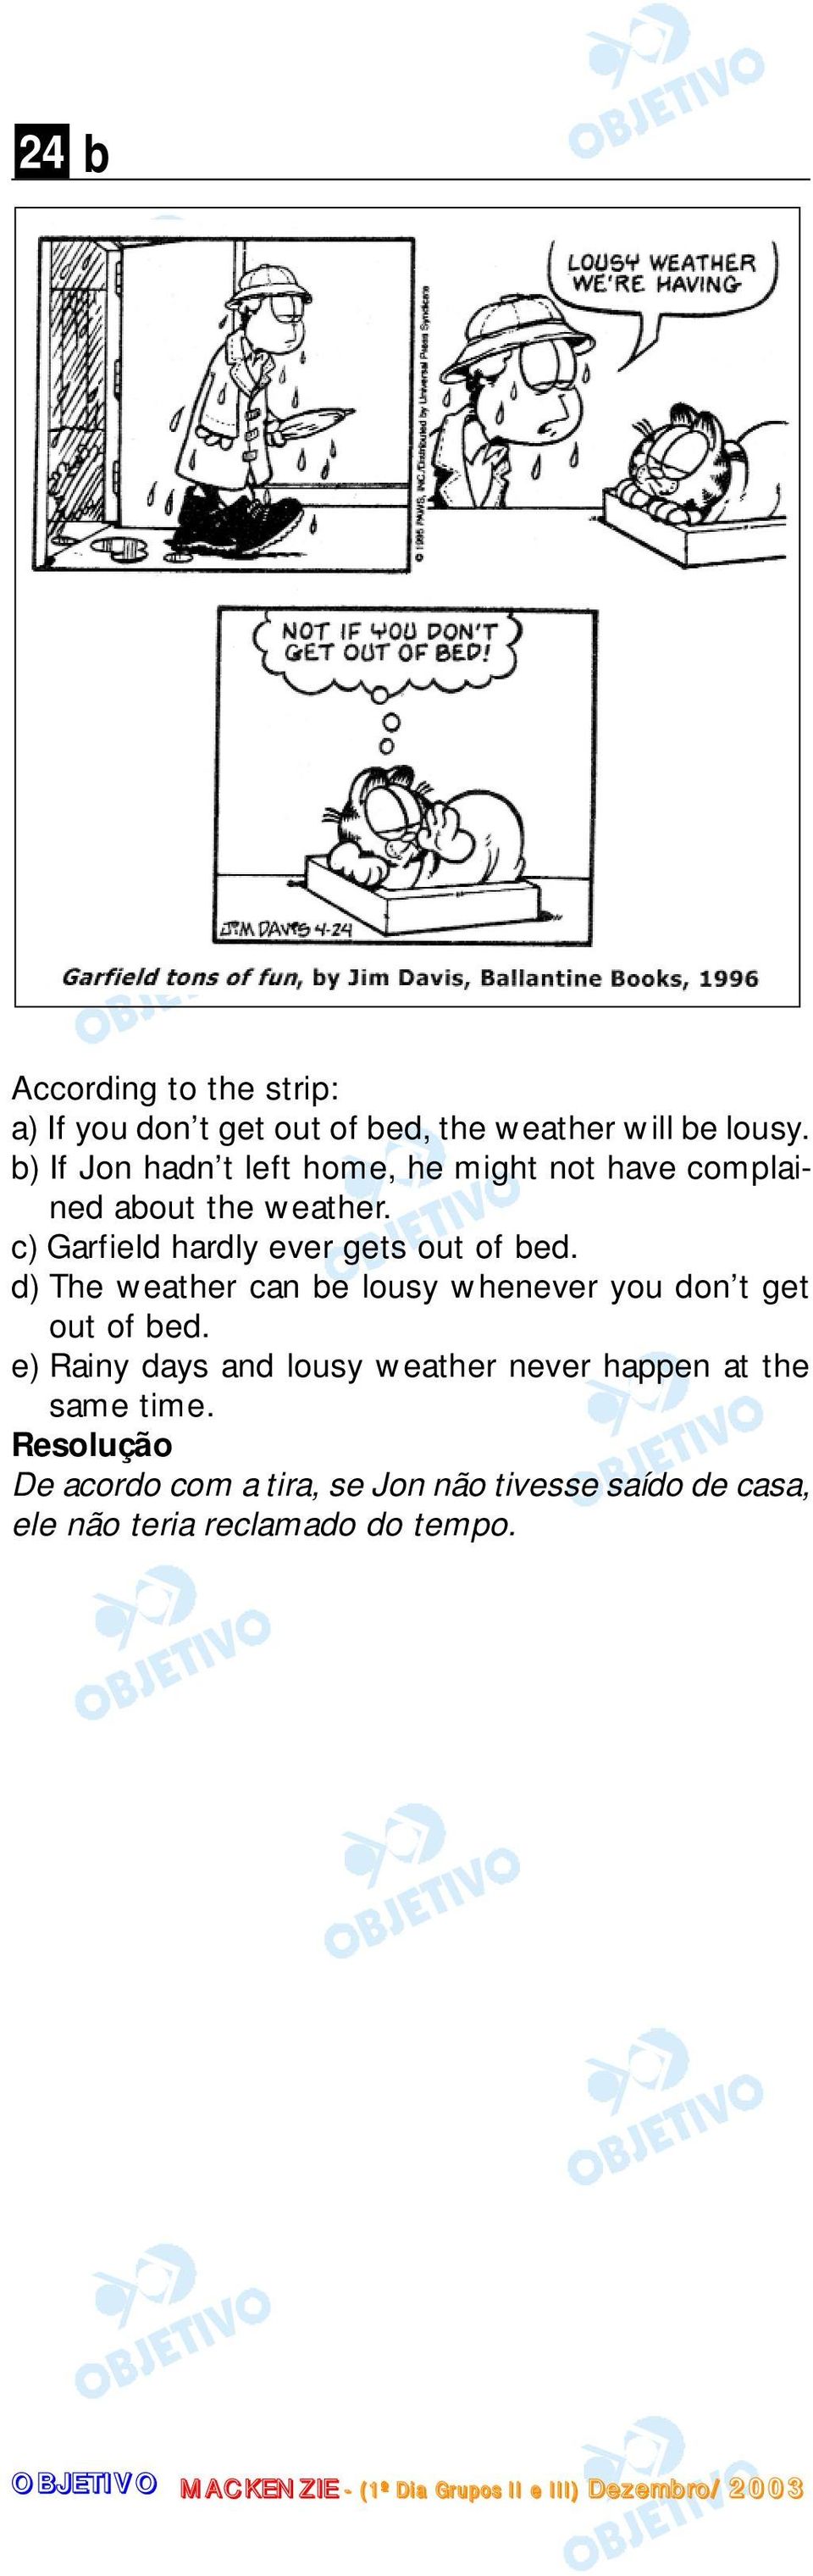 c) Garfield hardly ever gets out of bed. d) The weather can be lousy whenever you don t get out of bed.